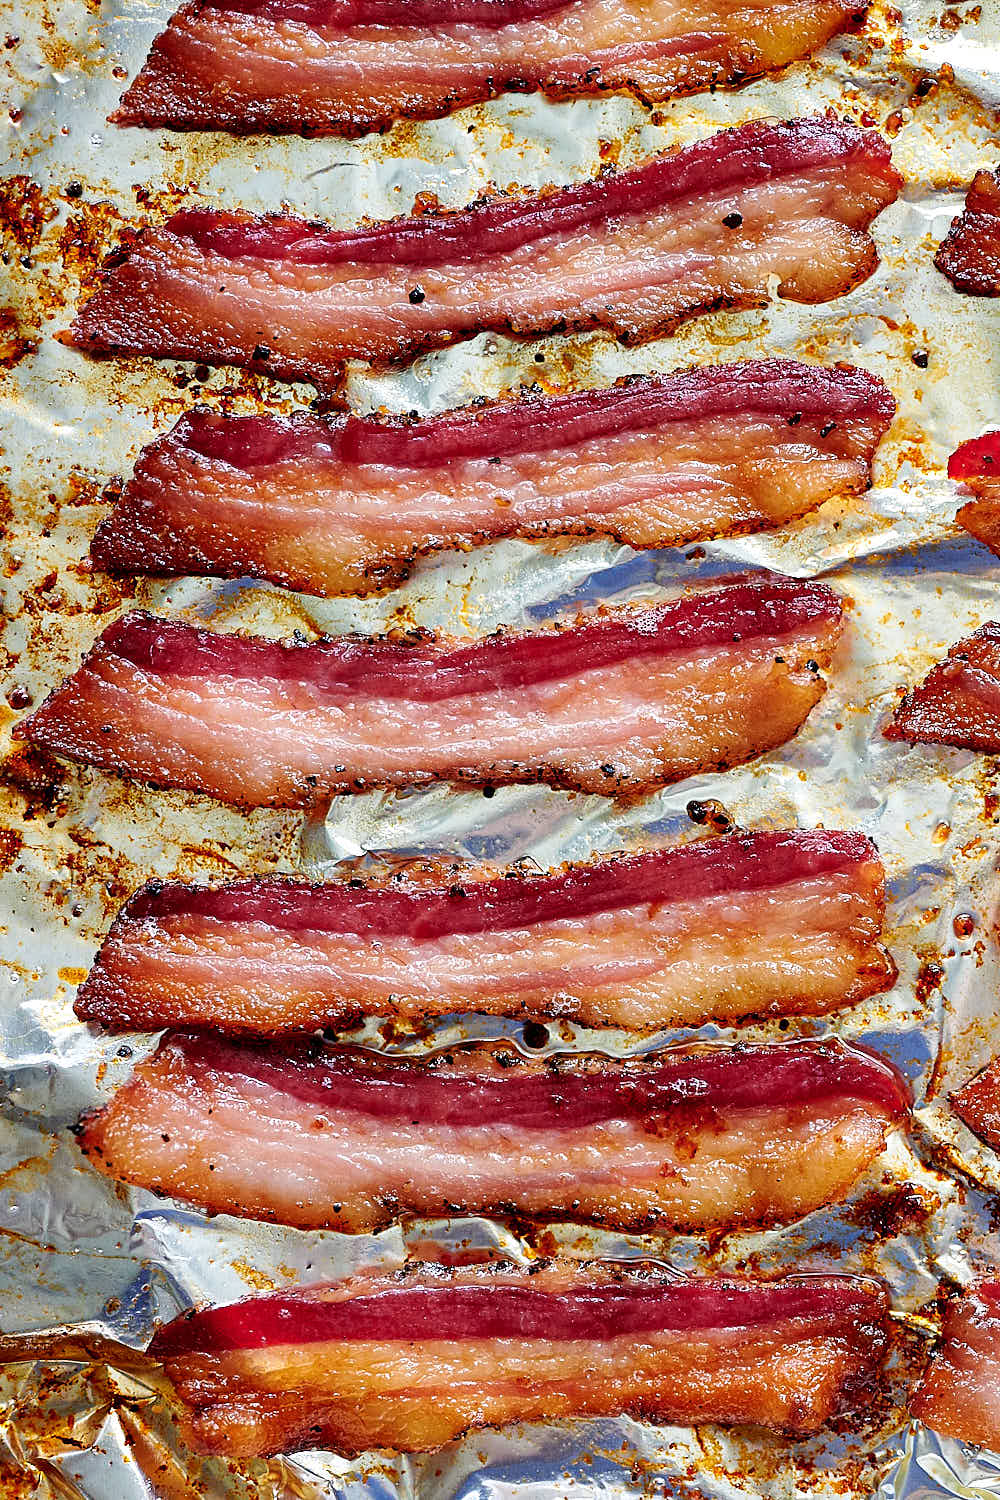 How to cook bacon in the oven.